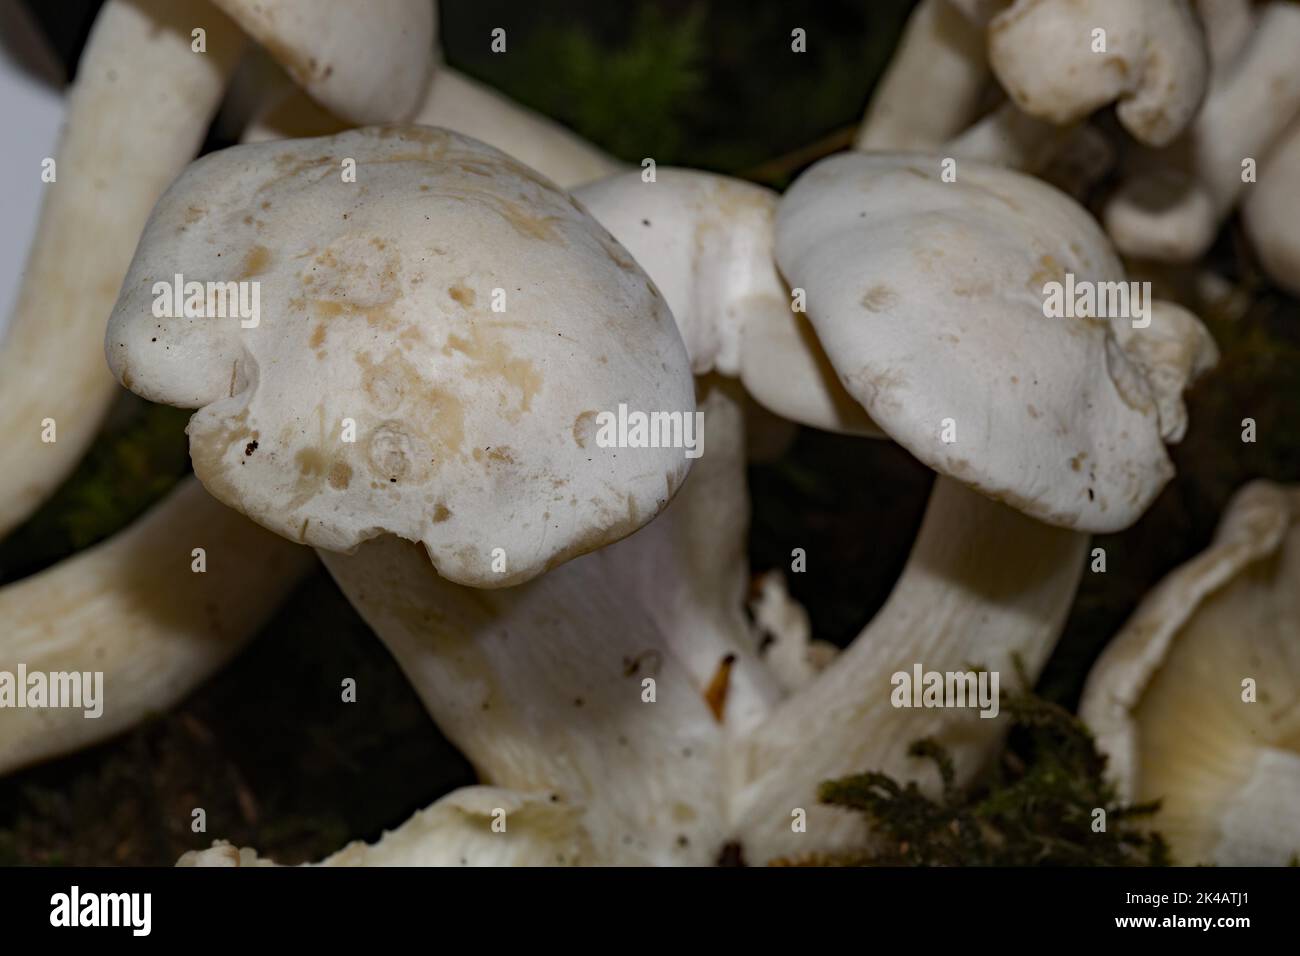 White tufted razorback Fruiting bodies with white stems and caps Stock Photo